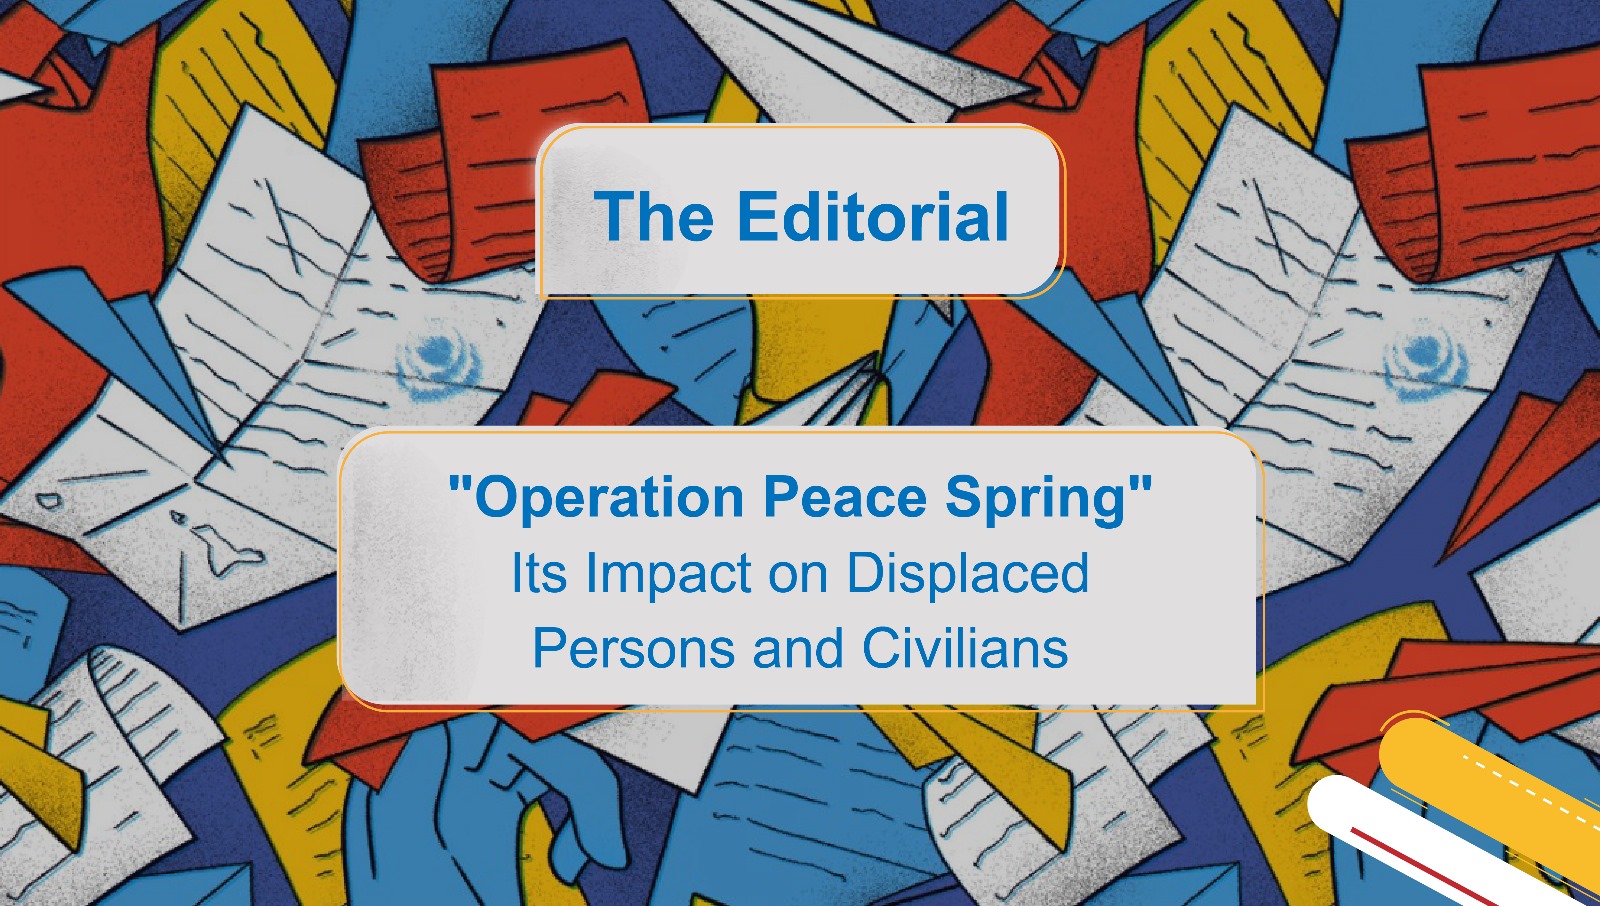 “Operation Peace Spring”: Its Impact on Displaced Persons and Civilians